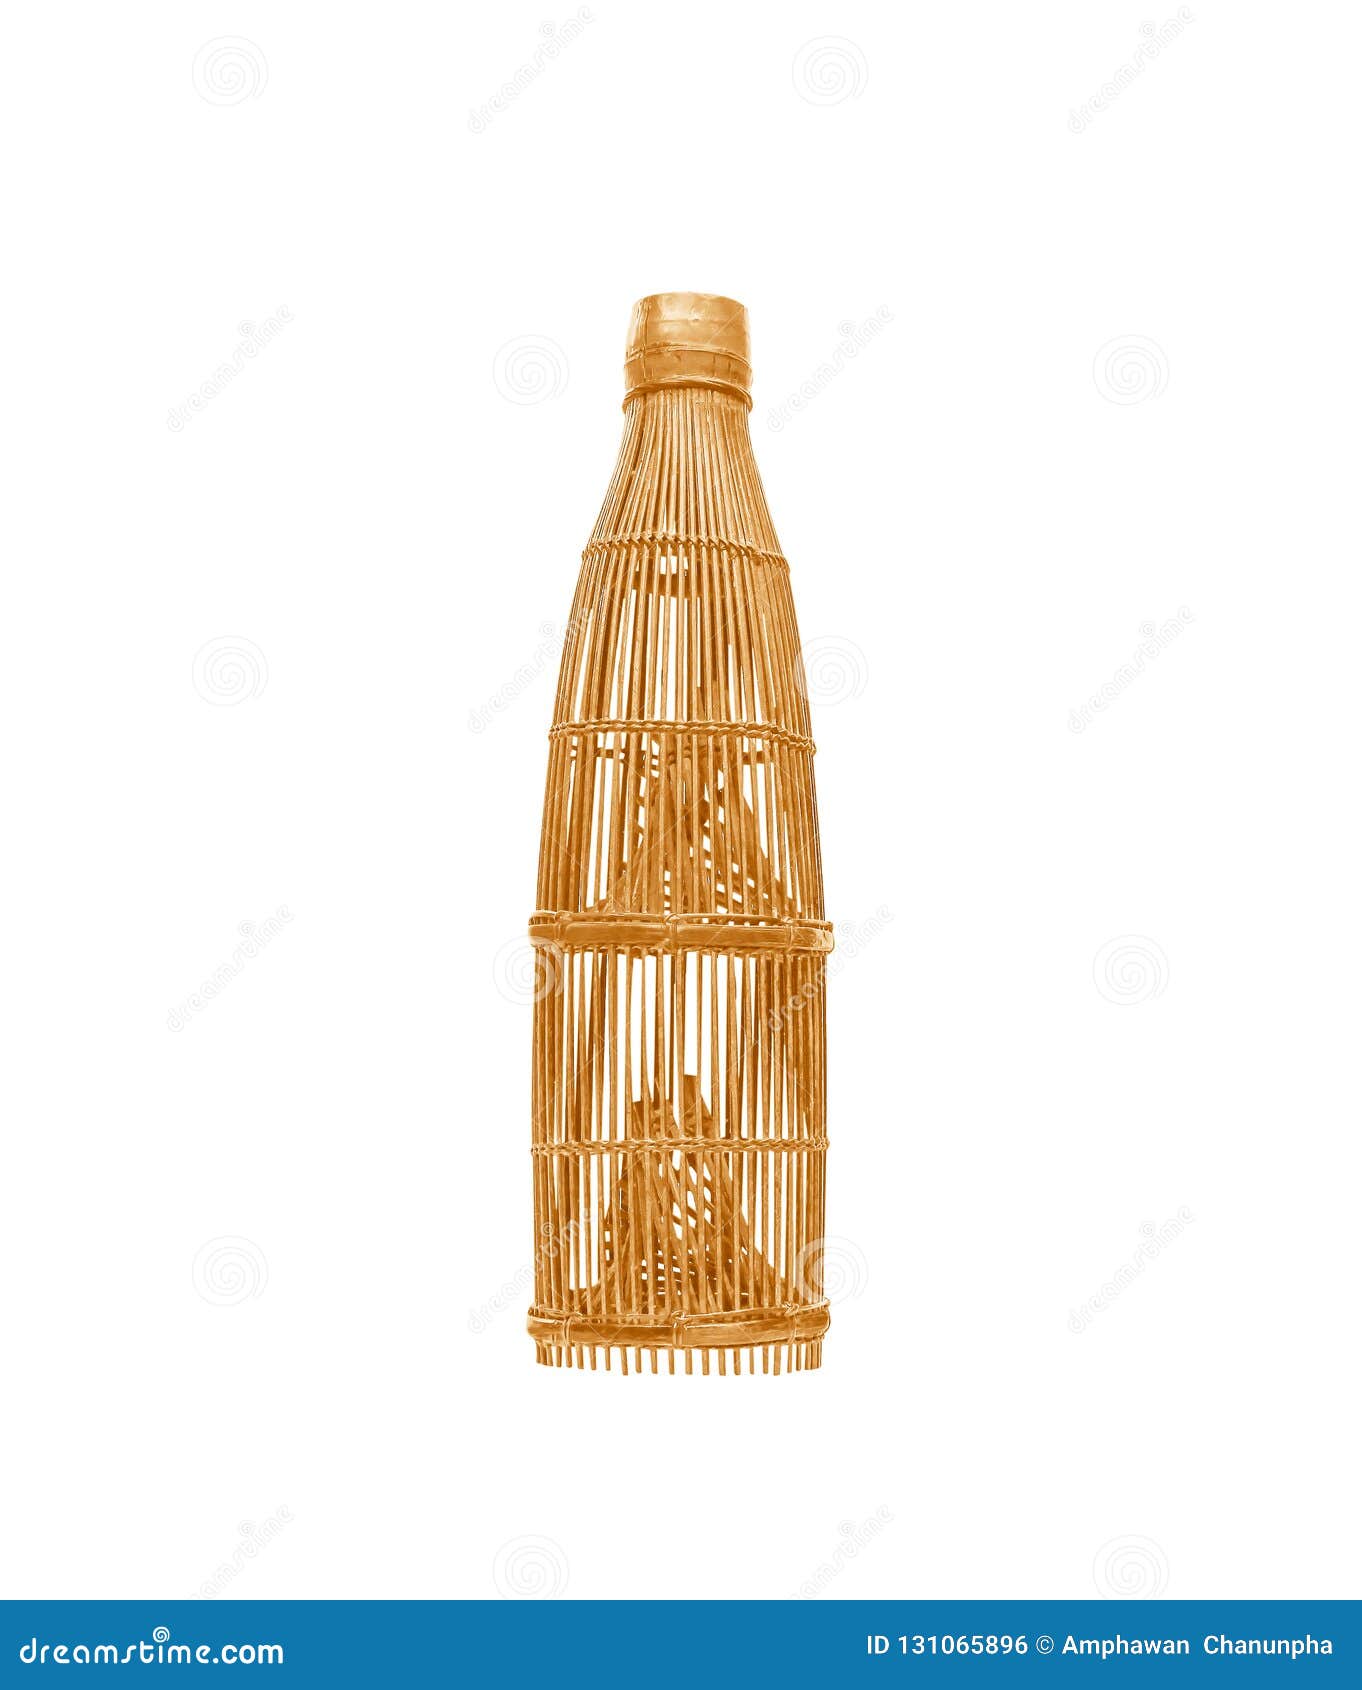 The Traditional Local Bamboo Fish Trap Patterns Isolated on White  Background Stock Photo - Image of design, handmade: 131065896